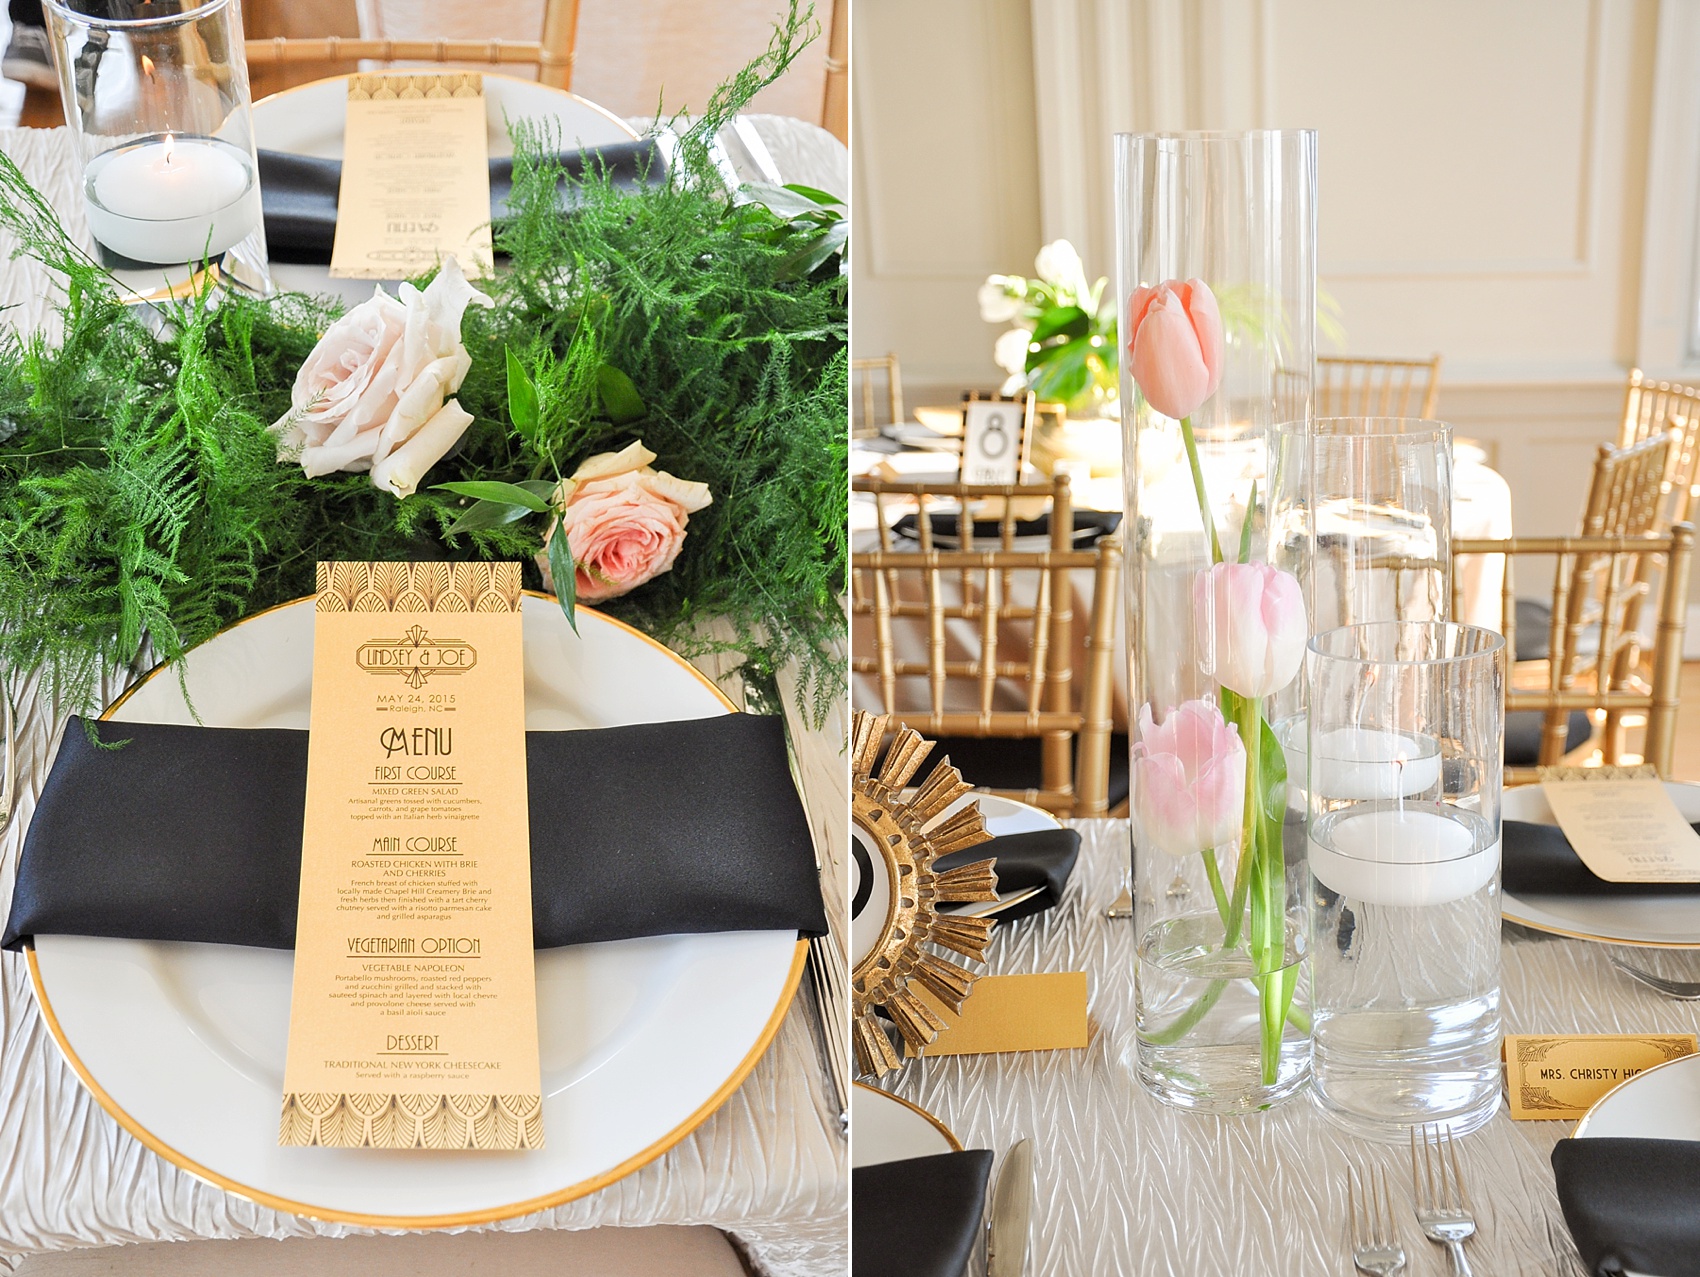 Downtown Raleigh Grand Ballroom wedding photos of Gatsby themed design with tropical leaves, white tulips, gold vase and black accents. Photos by Mikkel Paige Photography, flowers by Eclectic Sage.